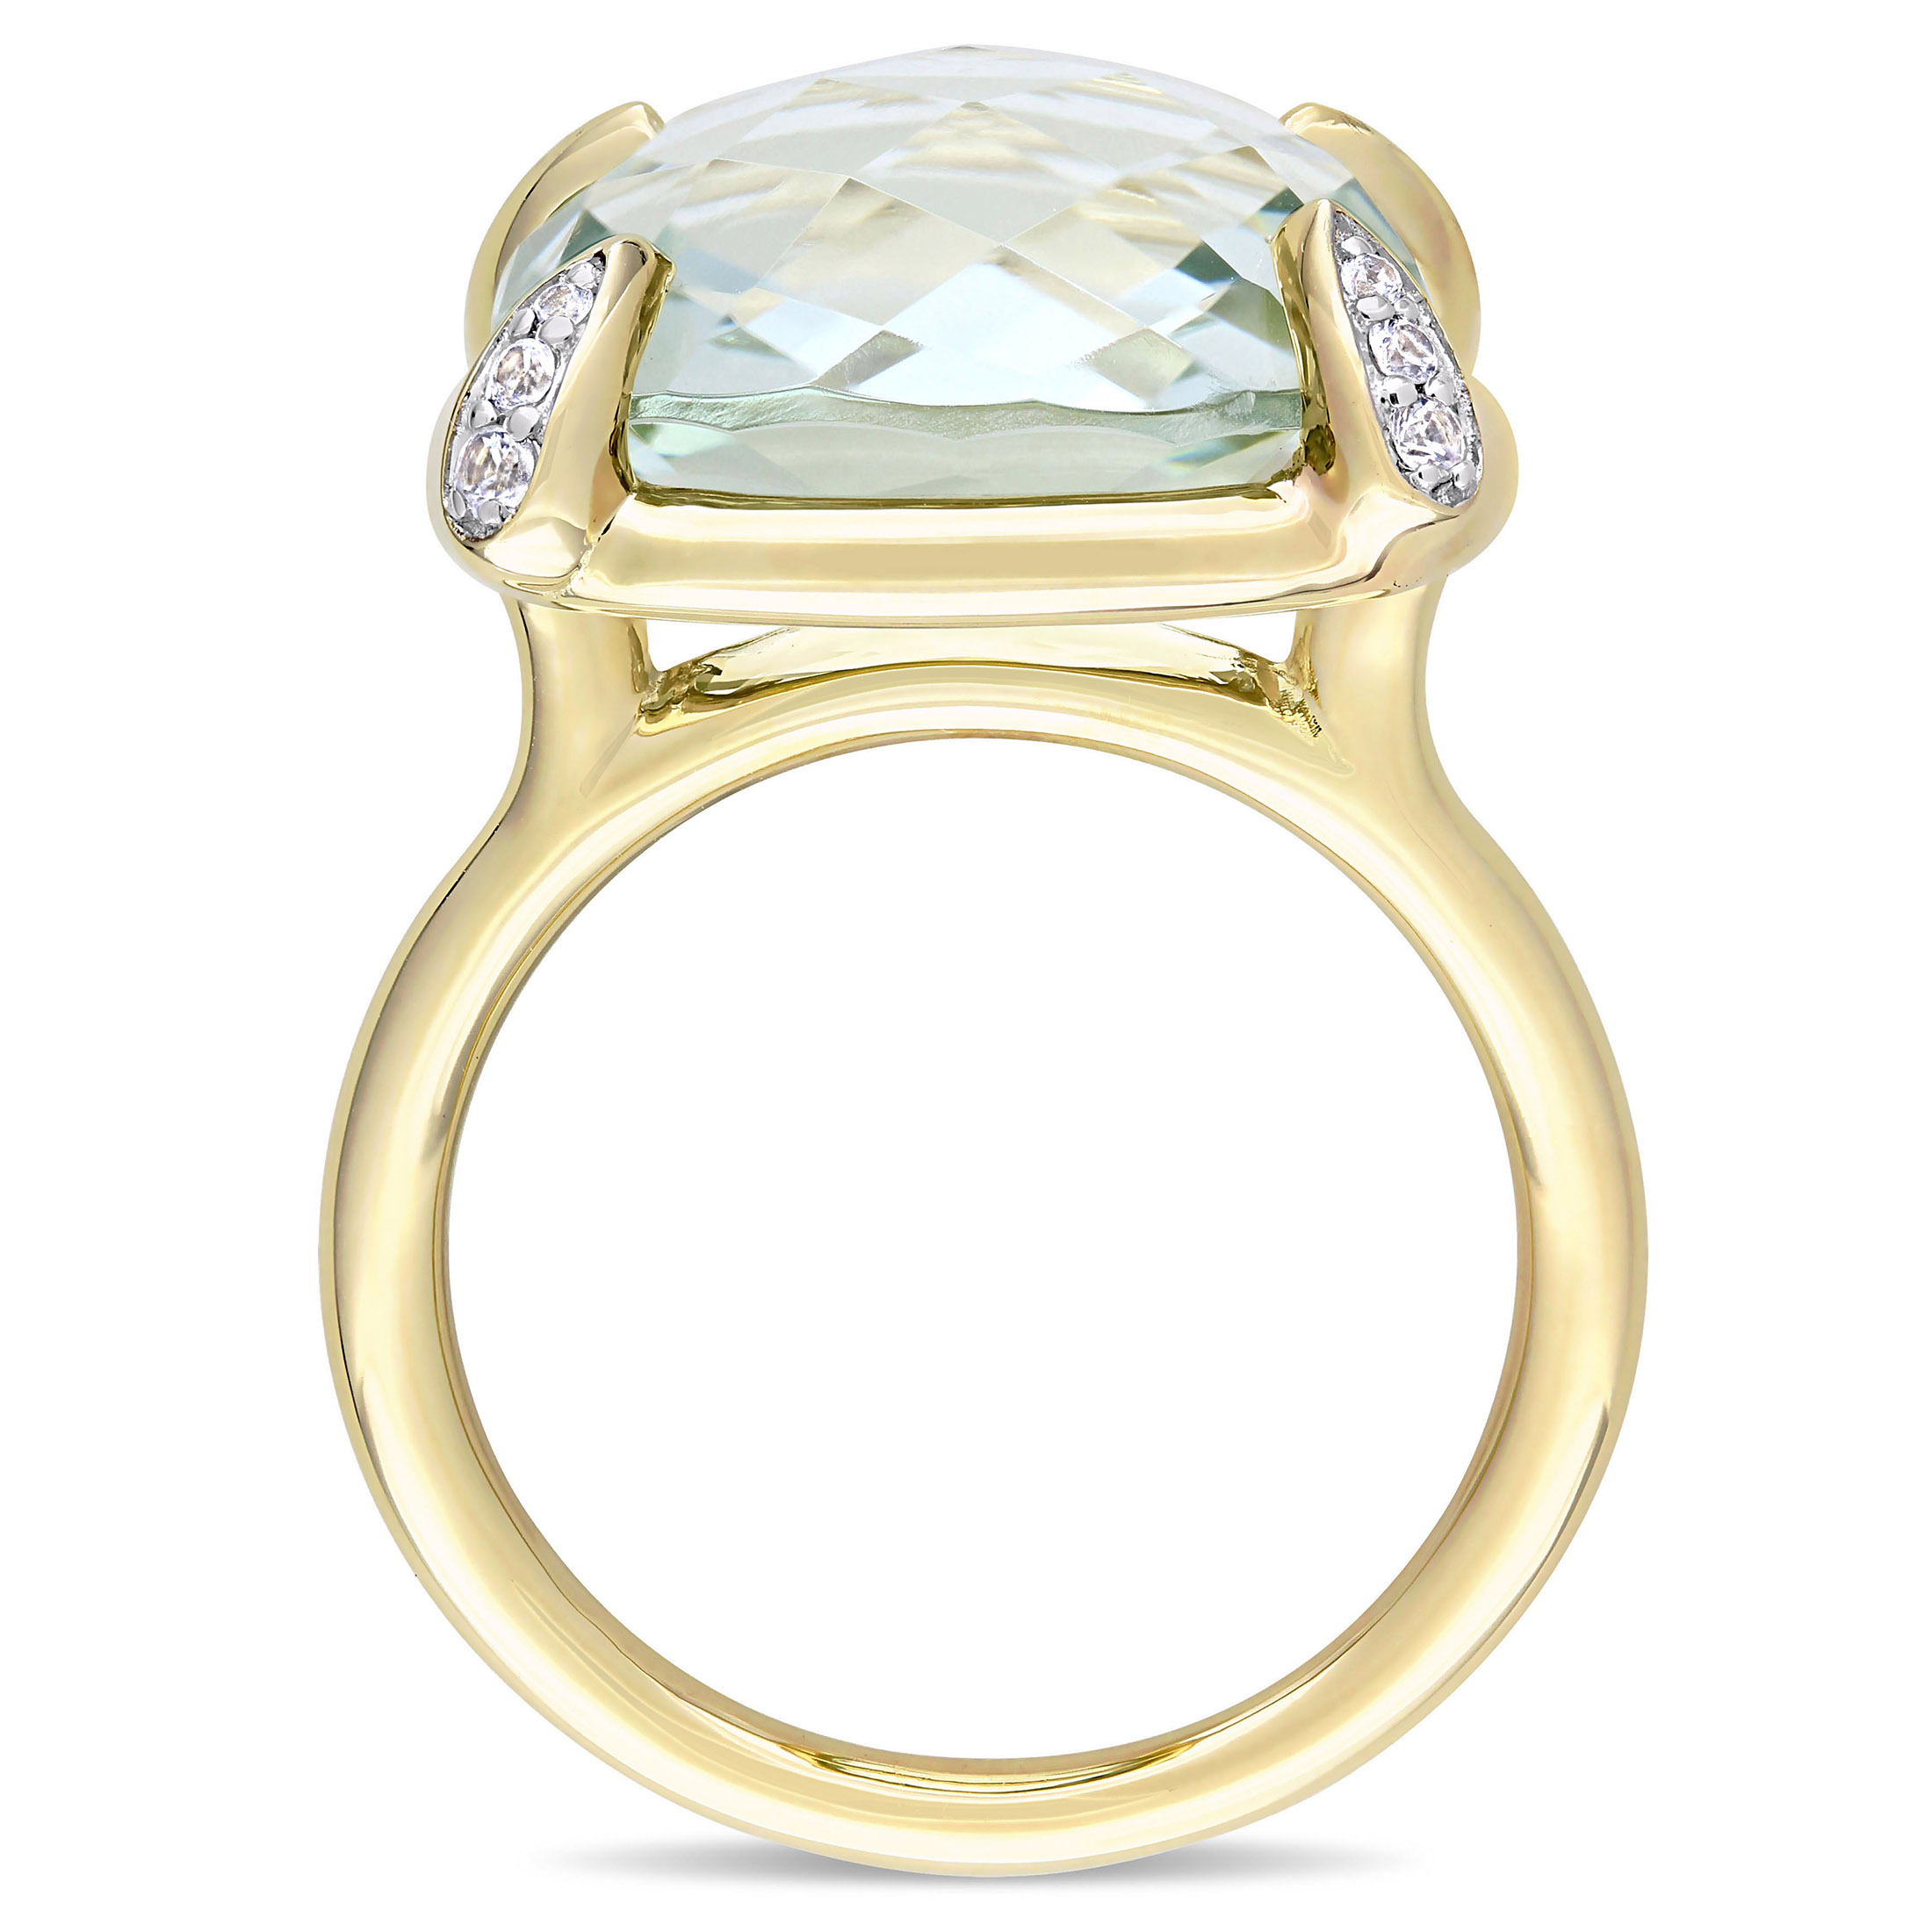 Miabella Women's 15-1/8 Carat T.G.W. Cushion Double Checkerboard-Cut Green Quartz and Round-Cut White Sapphire 14kt Yellow Gold Cocktail Ring - image 4 of 7